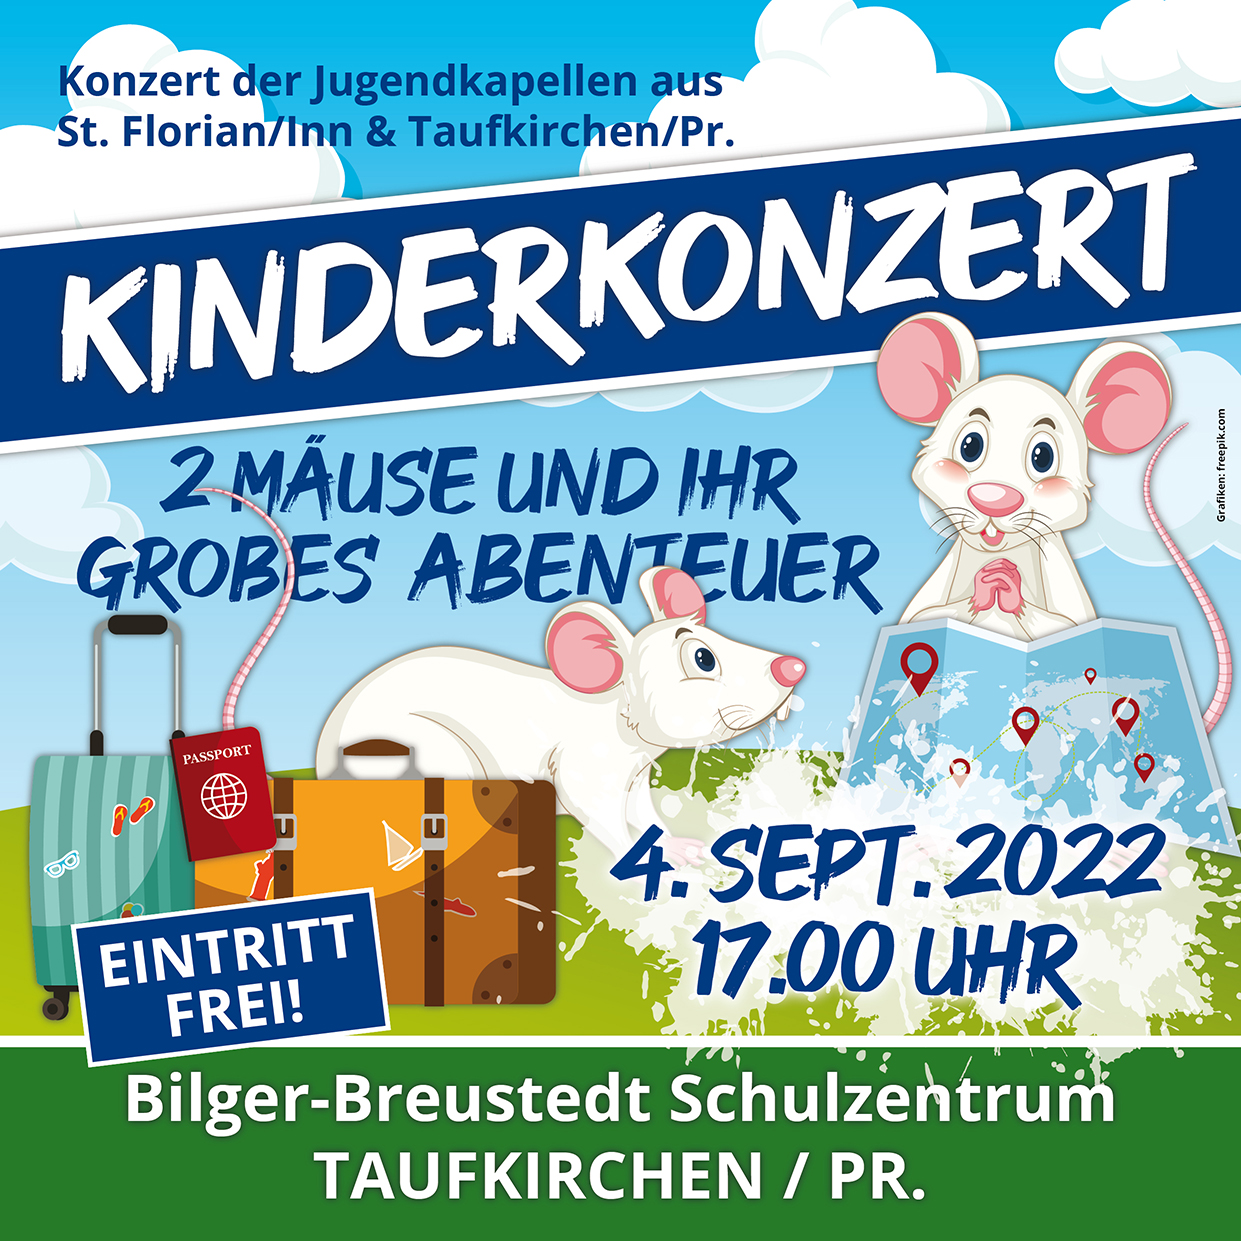 You are currently viewing Kinderkonzert 04.09.2022